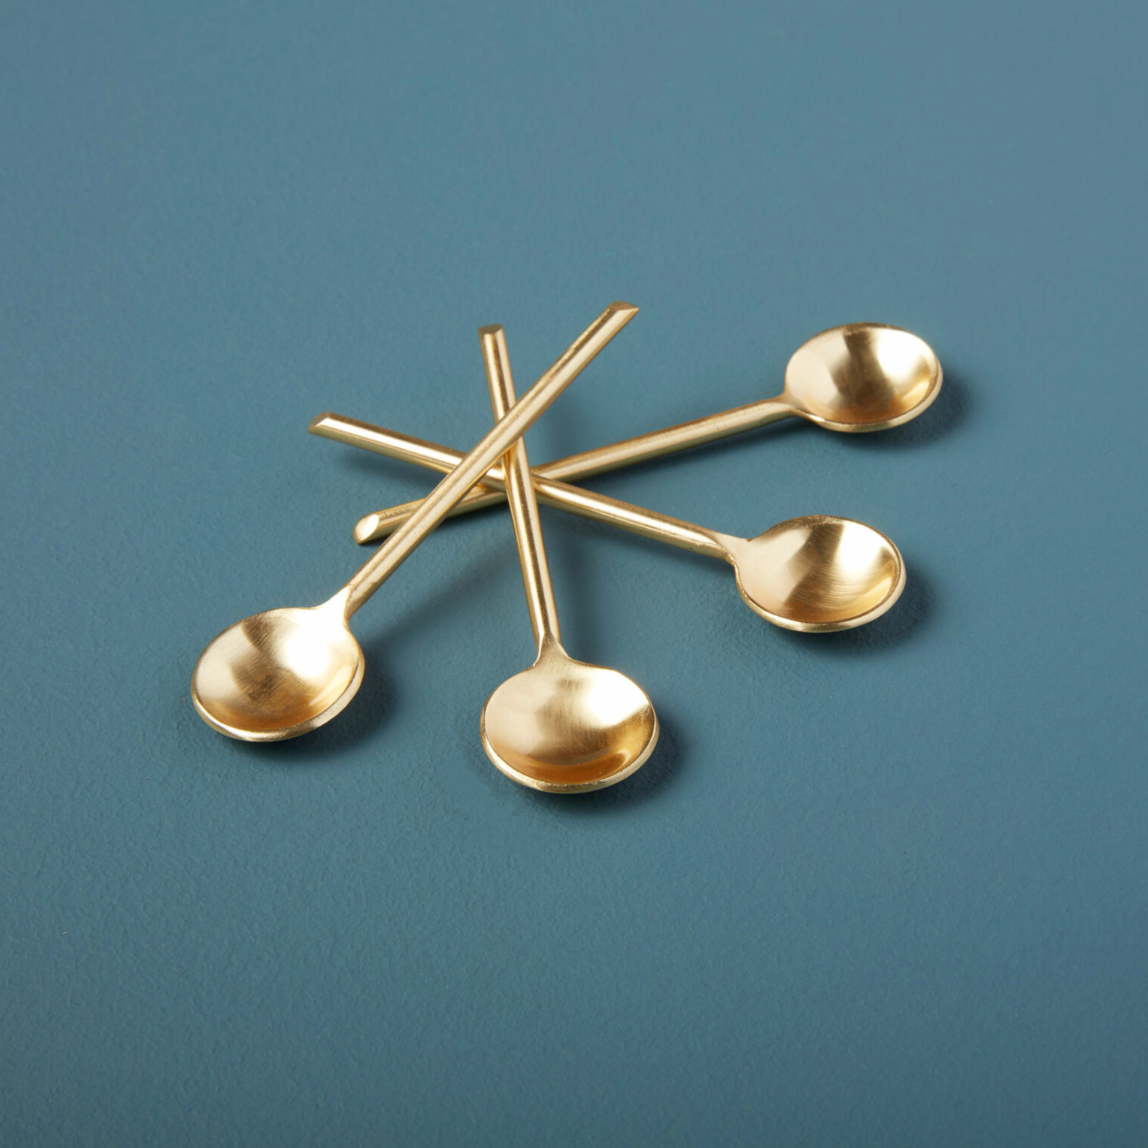 Mini Spoons in Gold, Set of 4